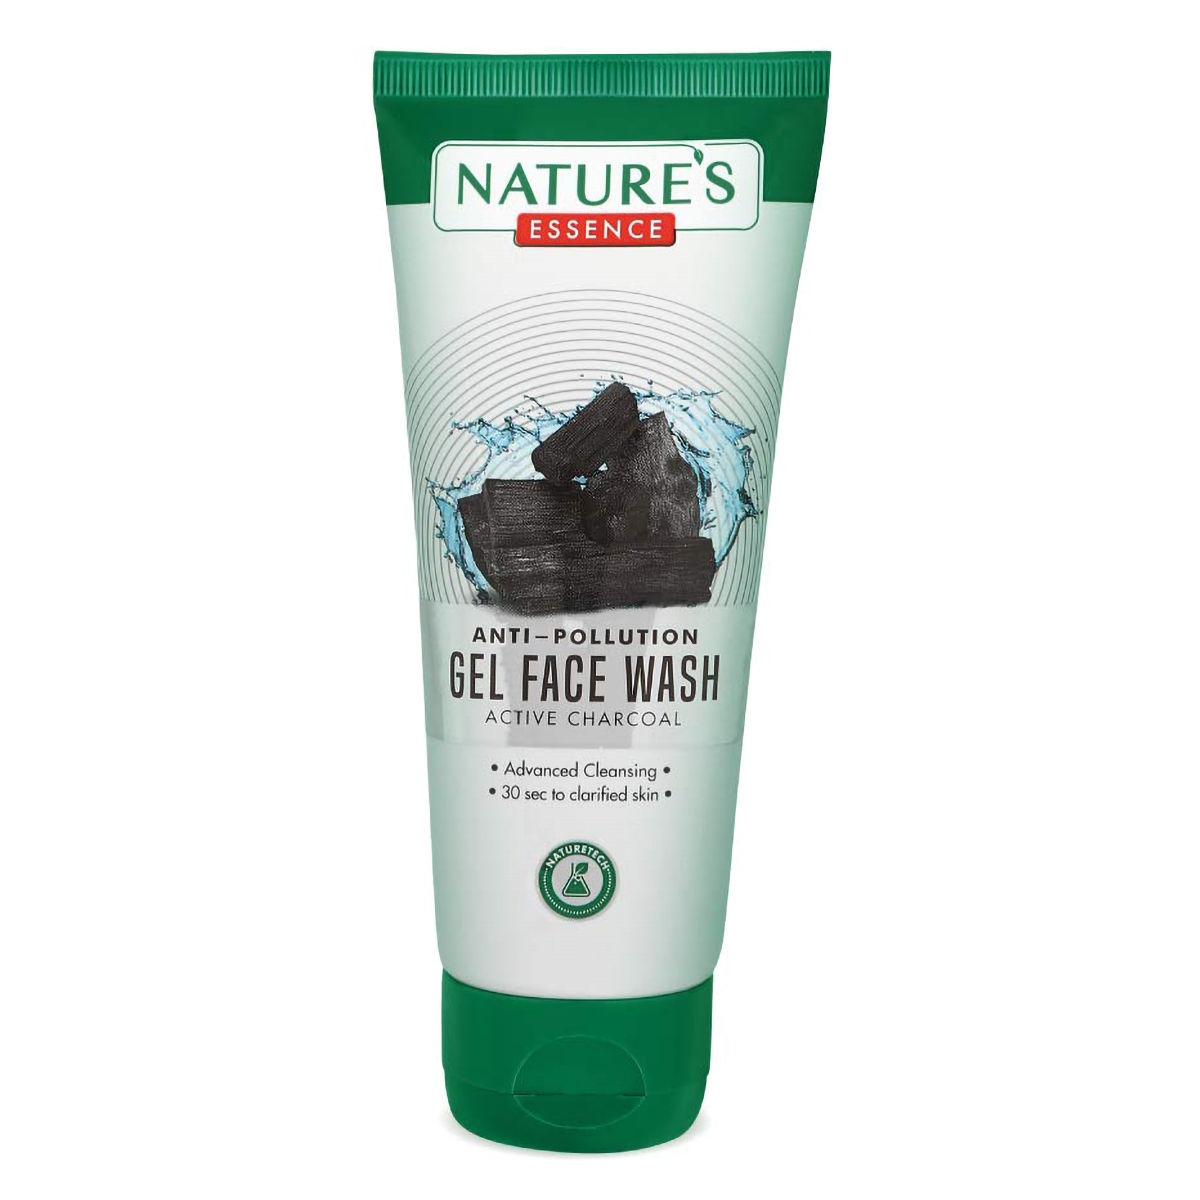 Buy Nature's Essence Anti-Pollution Active Charcoal Gel Face Wash, 65 ml Online